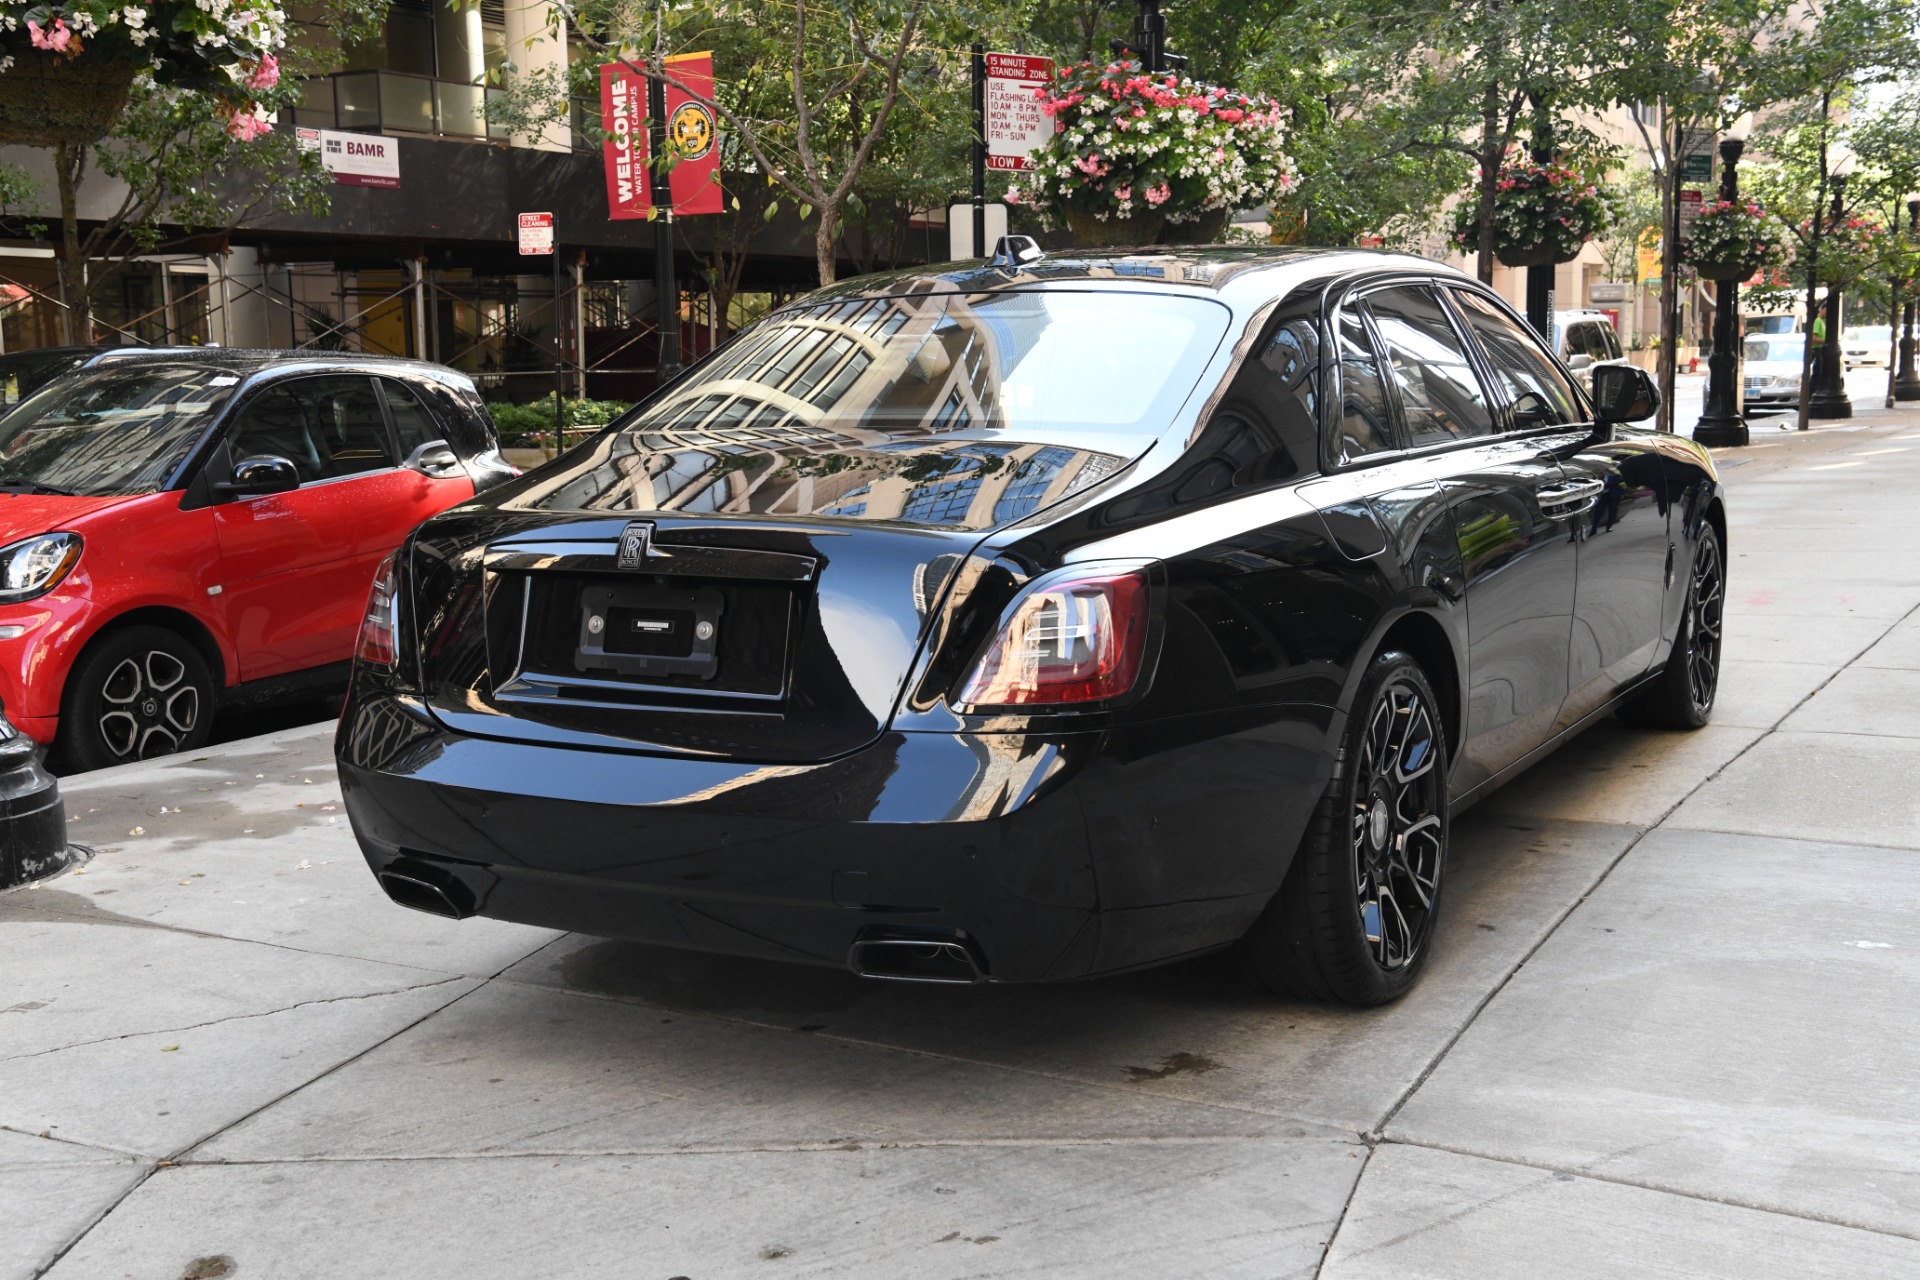 New 2022 Rolls-Royce Black Badge Ghost  | Chicago, IL